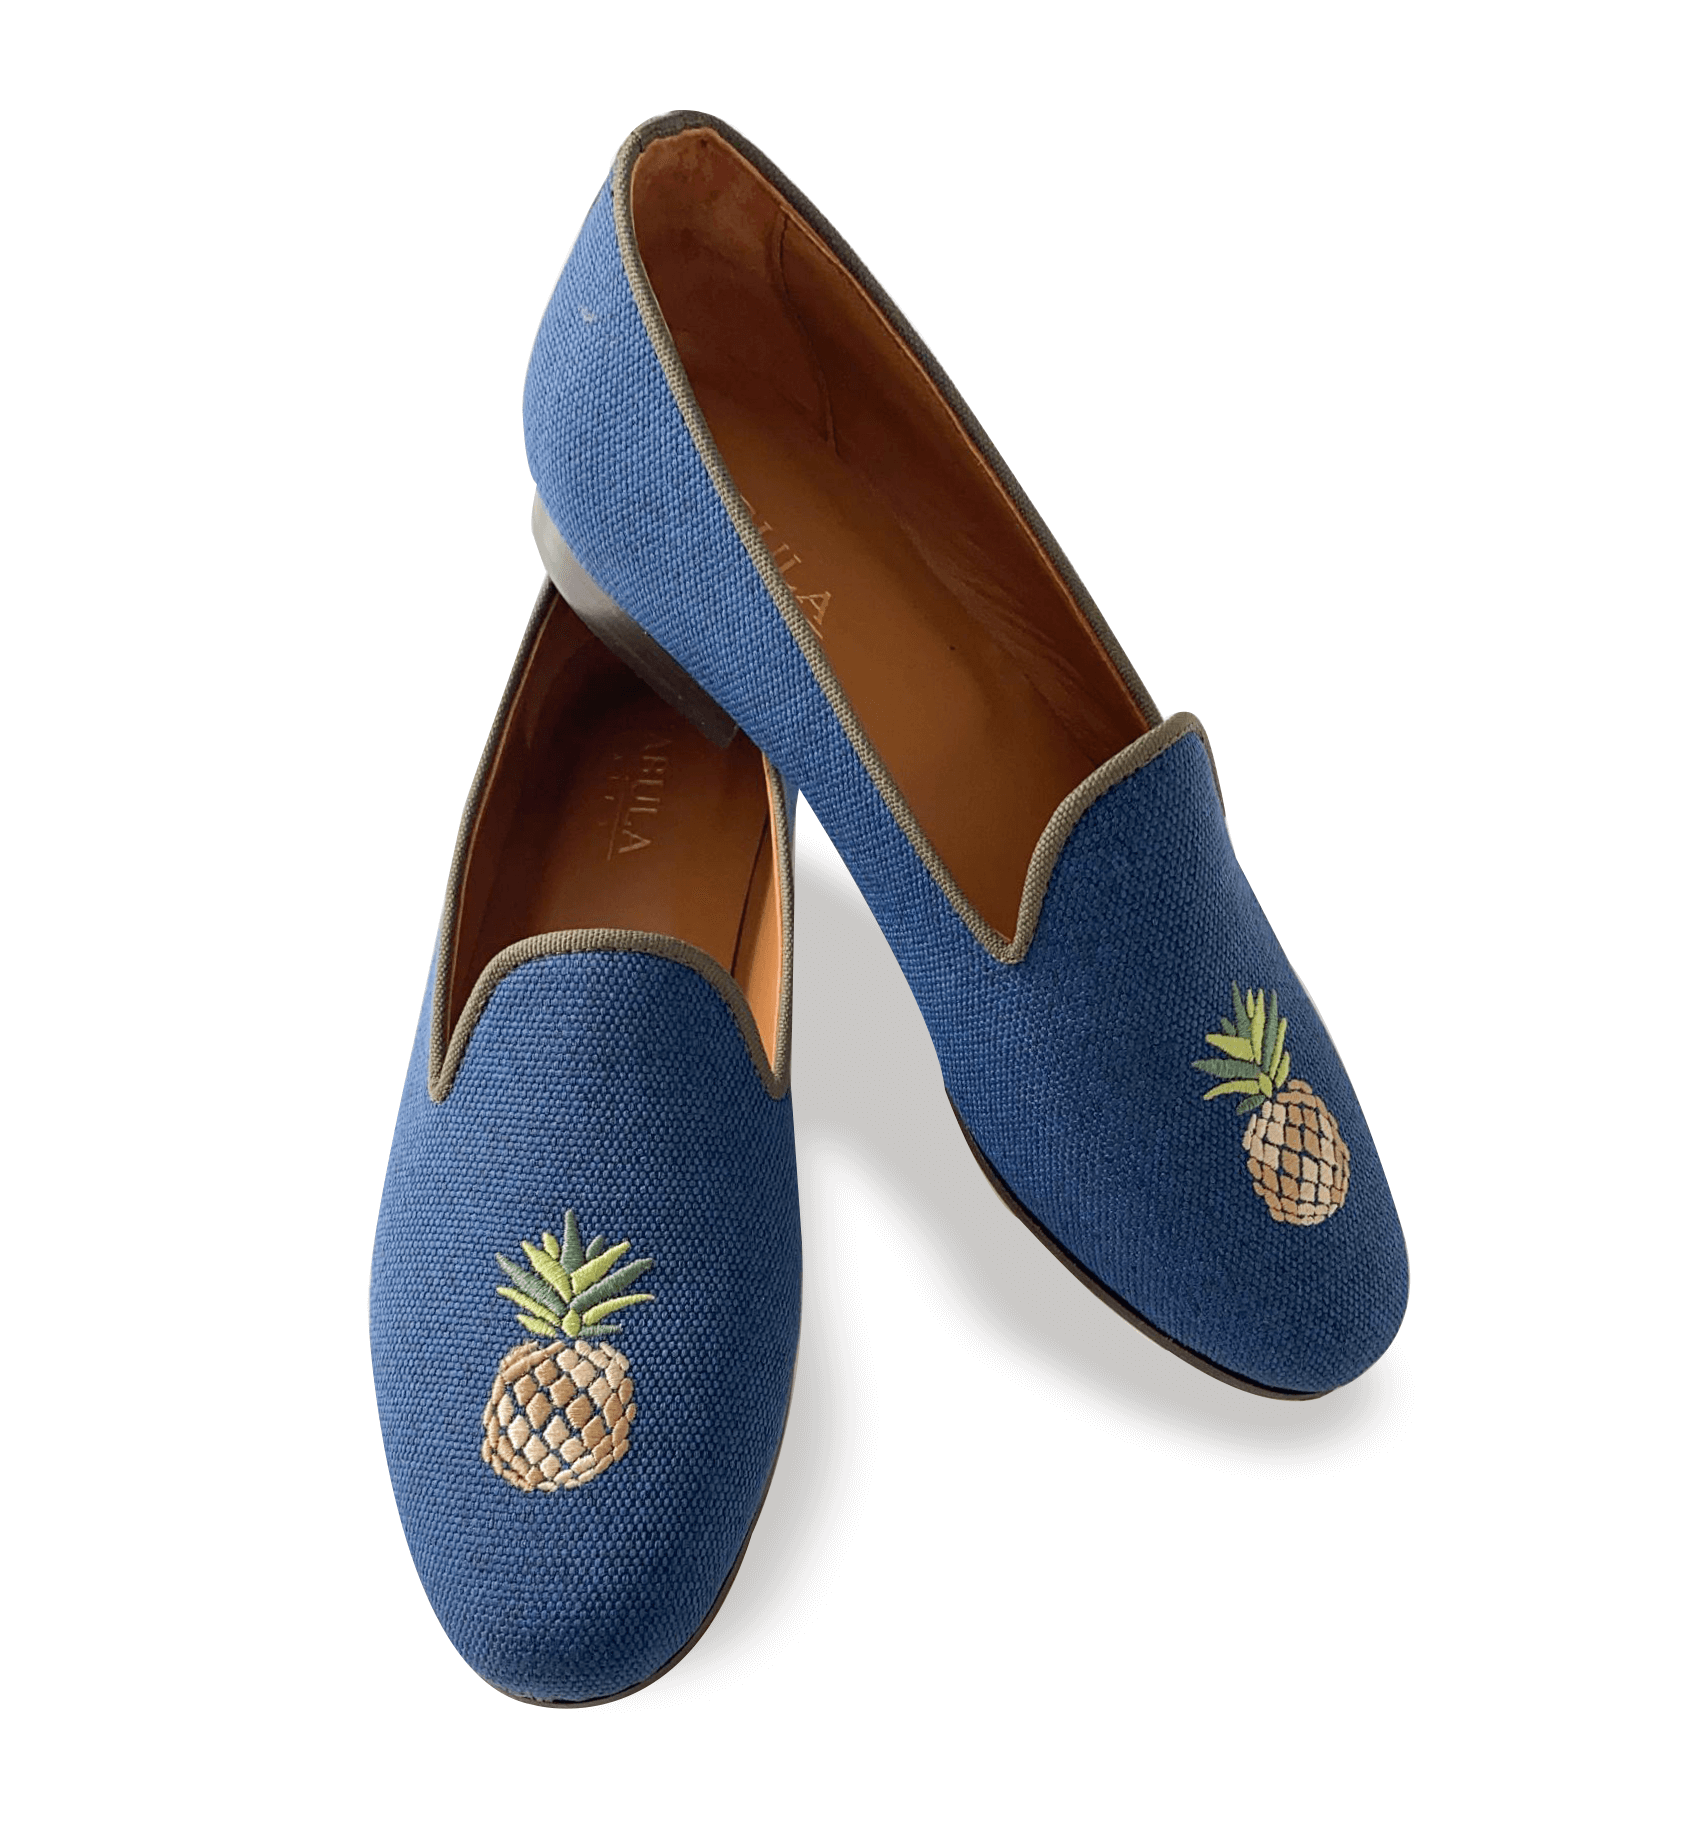 Luxury navy linen slippers with brown grosgrain trimming and pineapple embroidery. Bespoke slippers